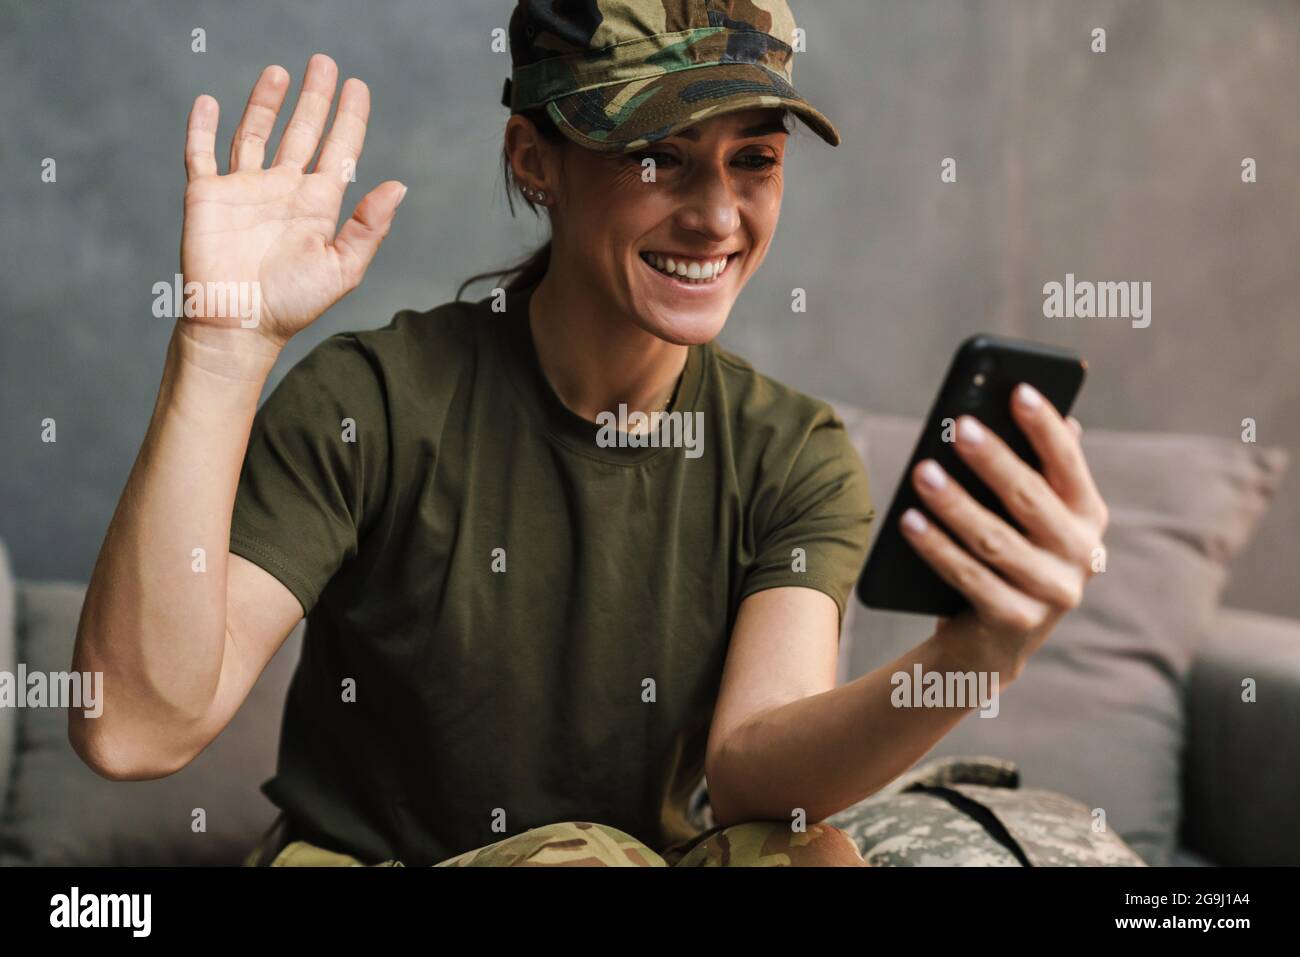 Smiling beautiful soldier woman waving hand while using mobile phone indoors Stock Photo